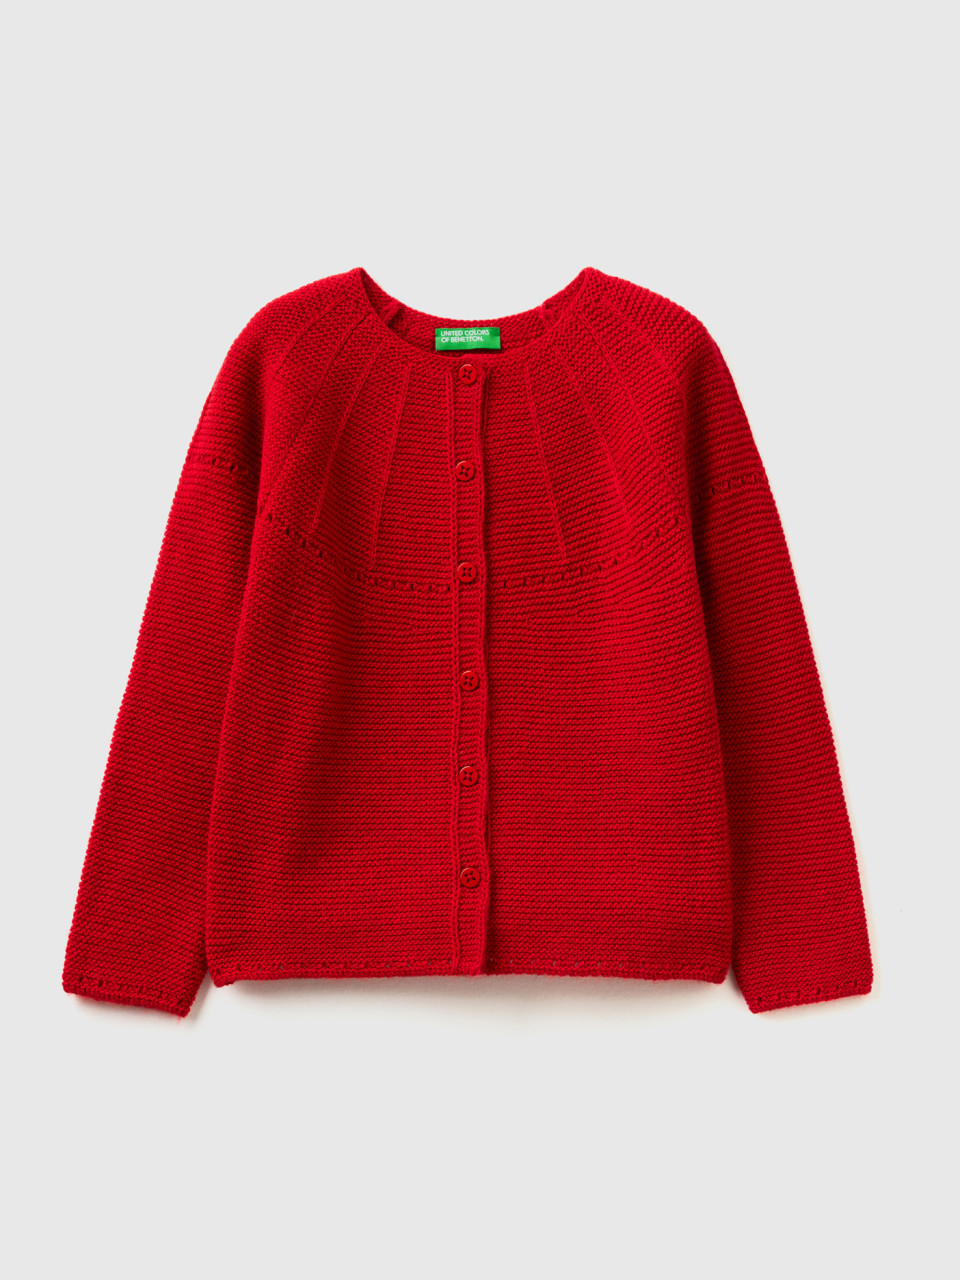 Benetton, Cardigan With Perforated Details, Red, Kids